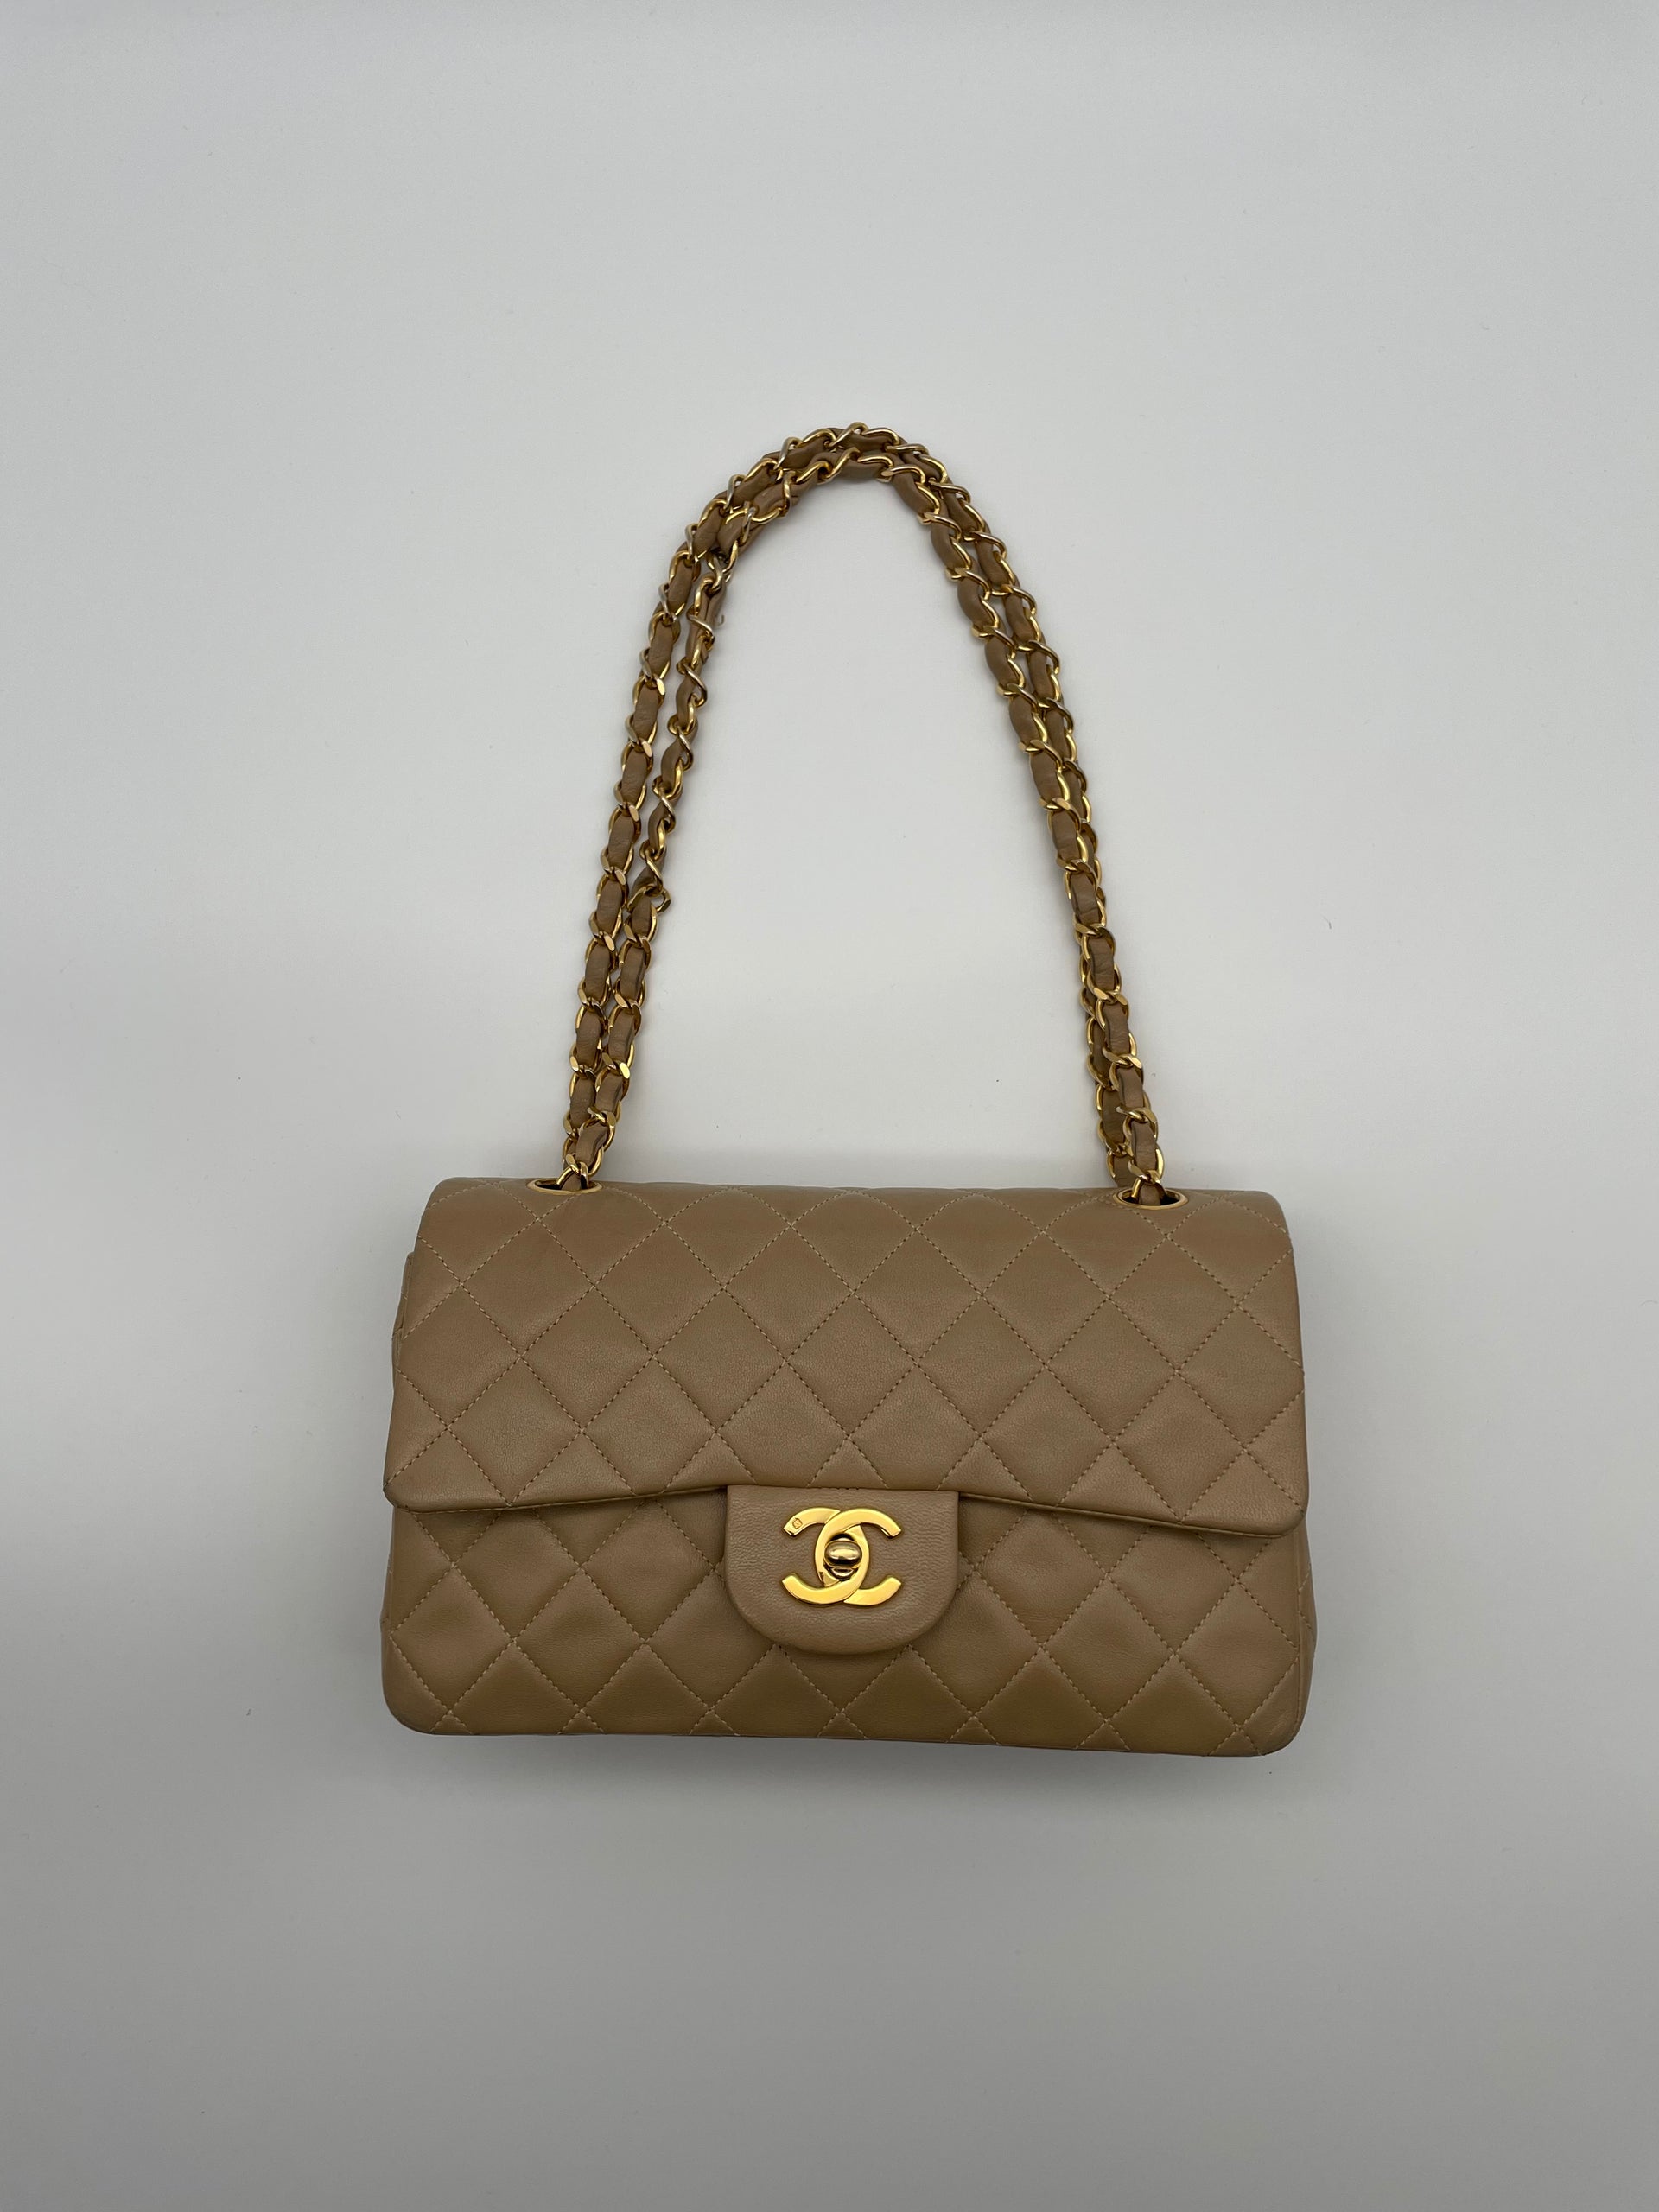 CHANEL Light Beige Quilted Lambskin Vintage Small Classic Single